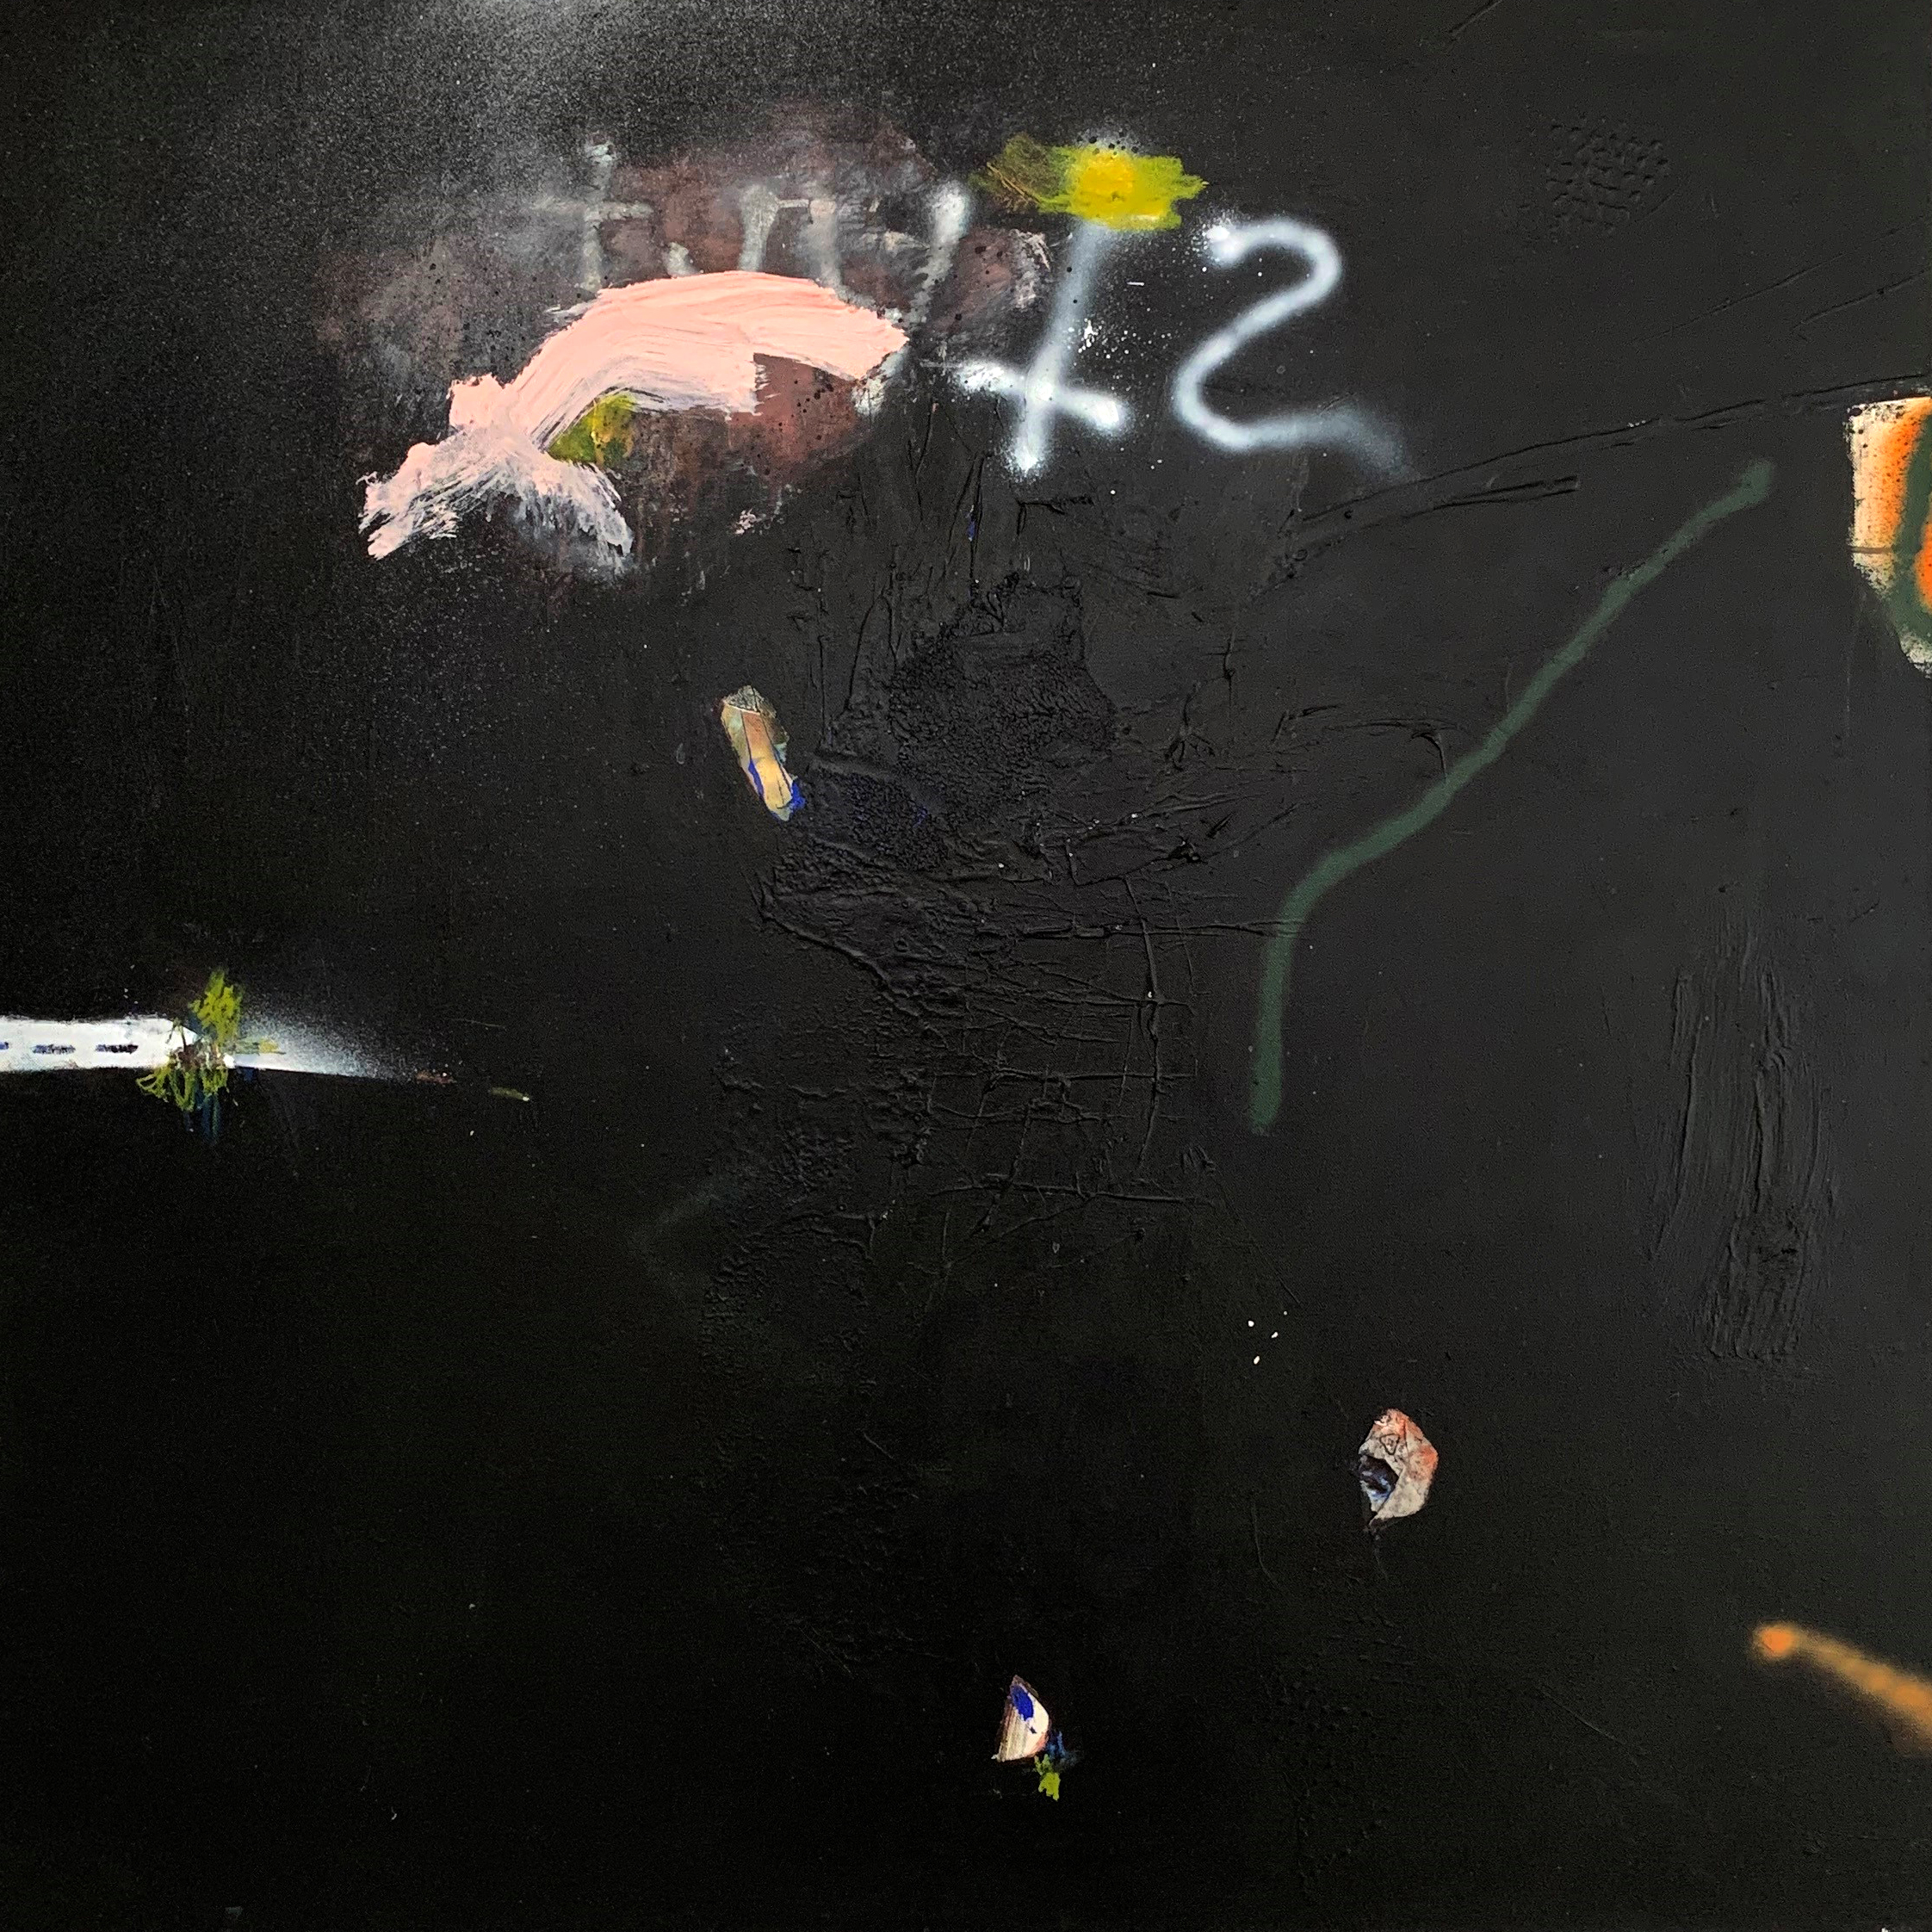 Harold David 'Got bored at the temple' acrylic spray paint collage and oil pastel on canvas 102 x 102cm $4,800